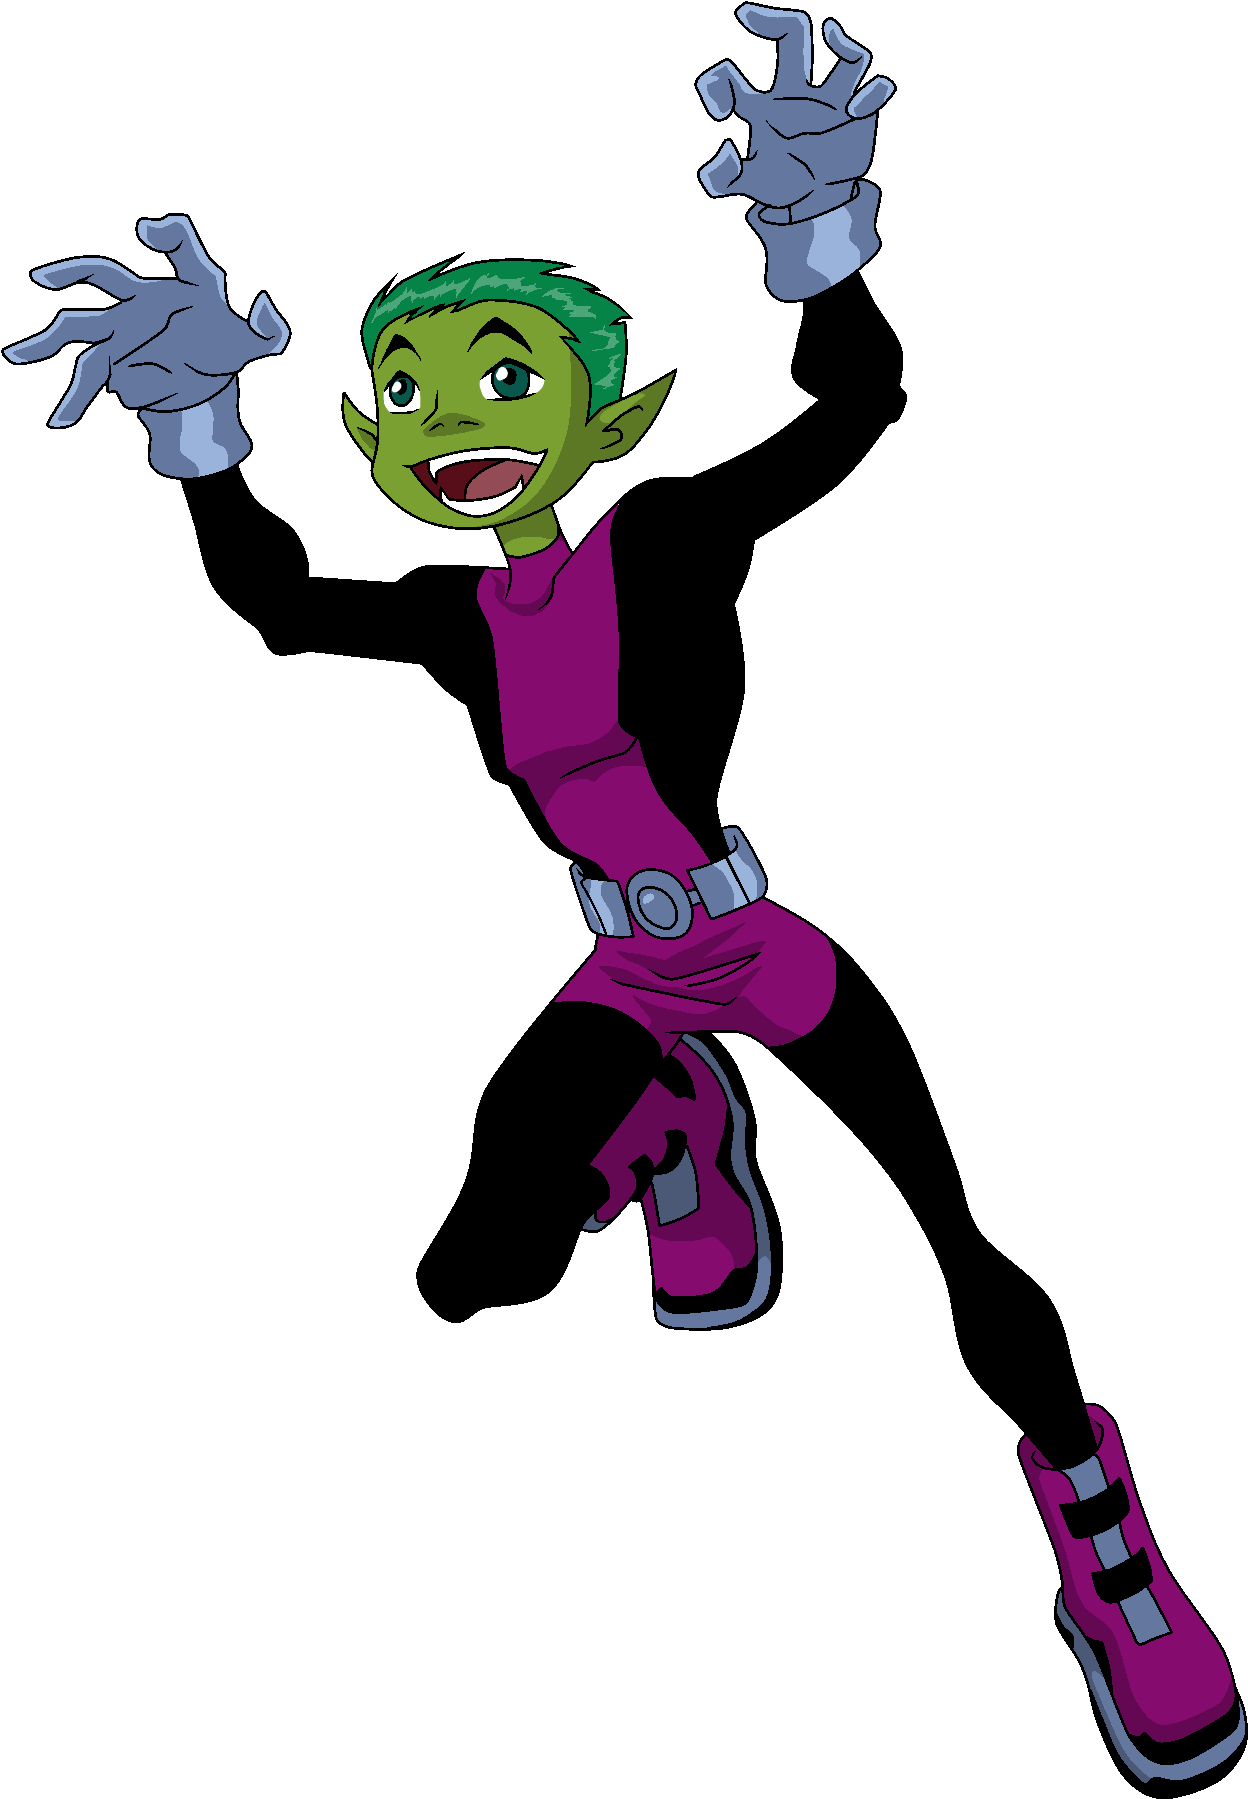 Cartoon Of A Green Boy In Purple And Pink Garment Jumping